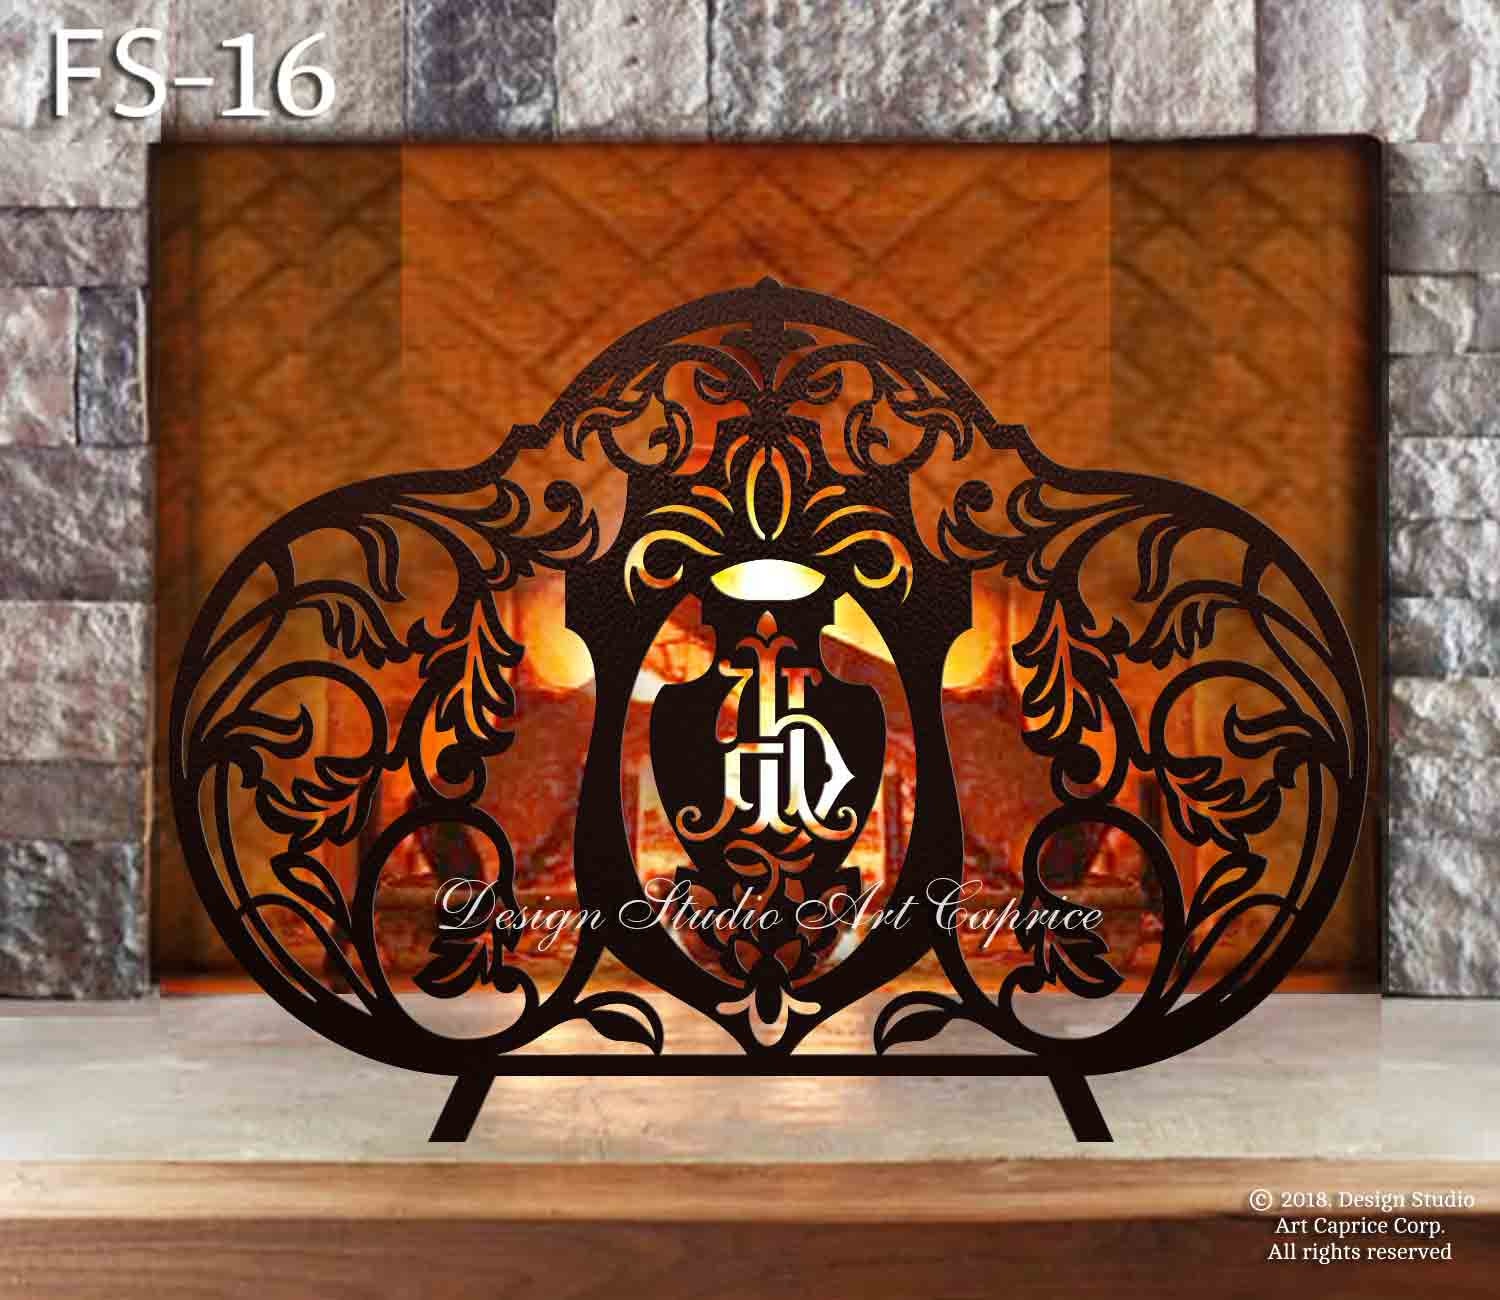 Fireplace Draft Cover CUSTOM MADE your Fireplace Dimensions With Inserted  Magnets or Adhesive Fasteners Felt Cover Insulation W/applique 